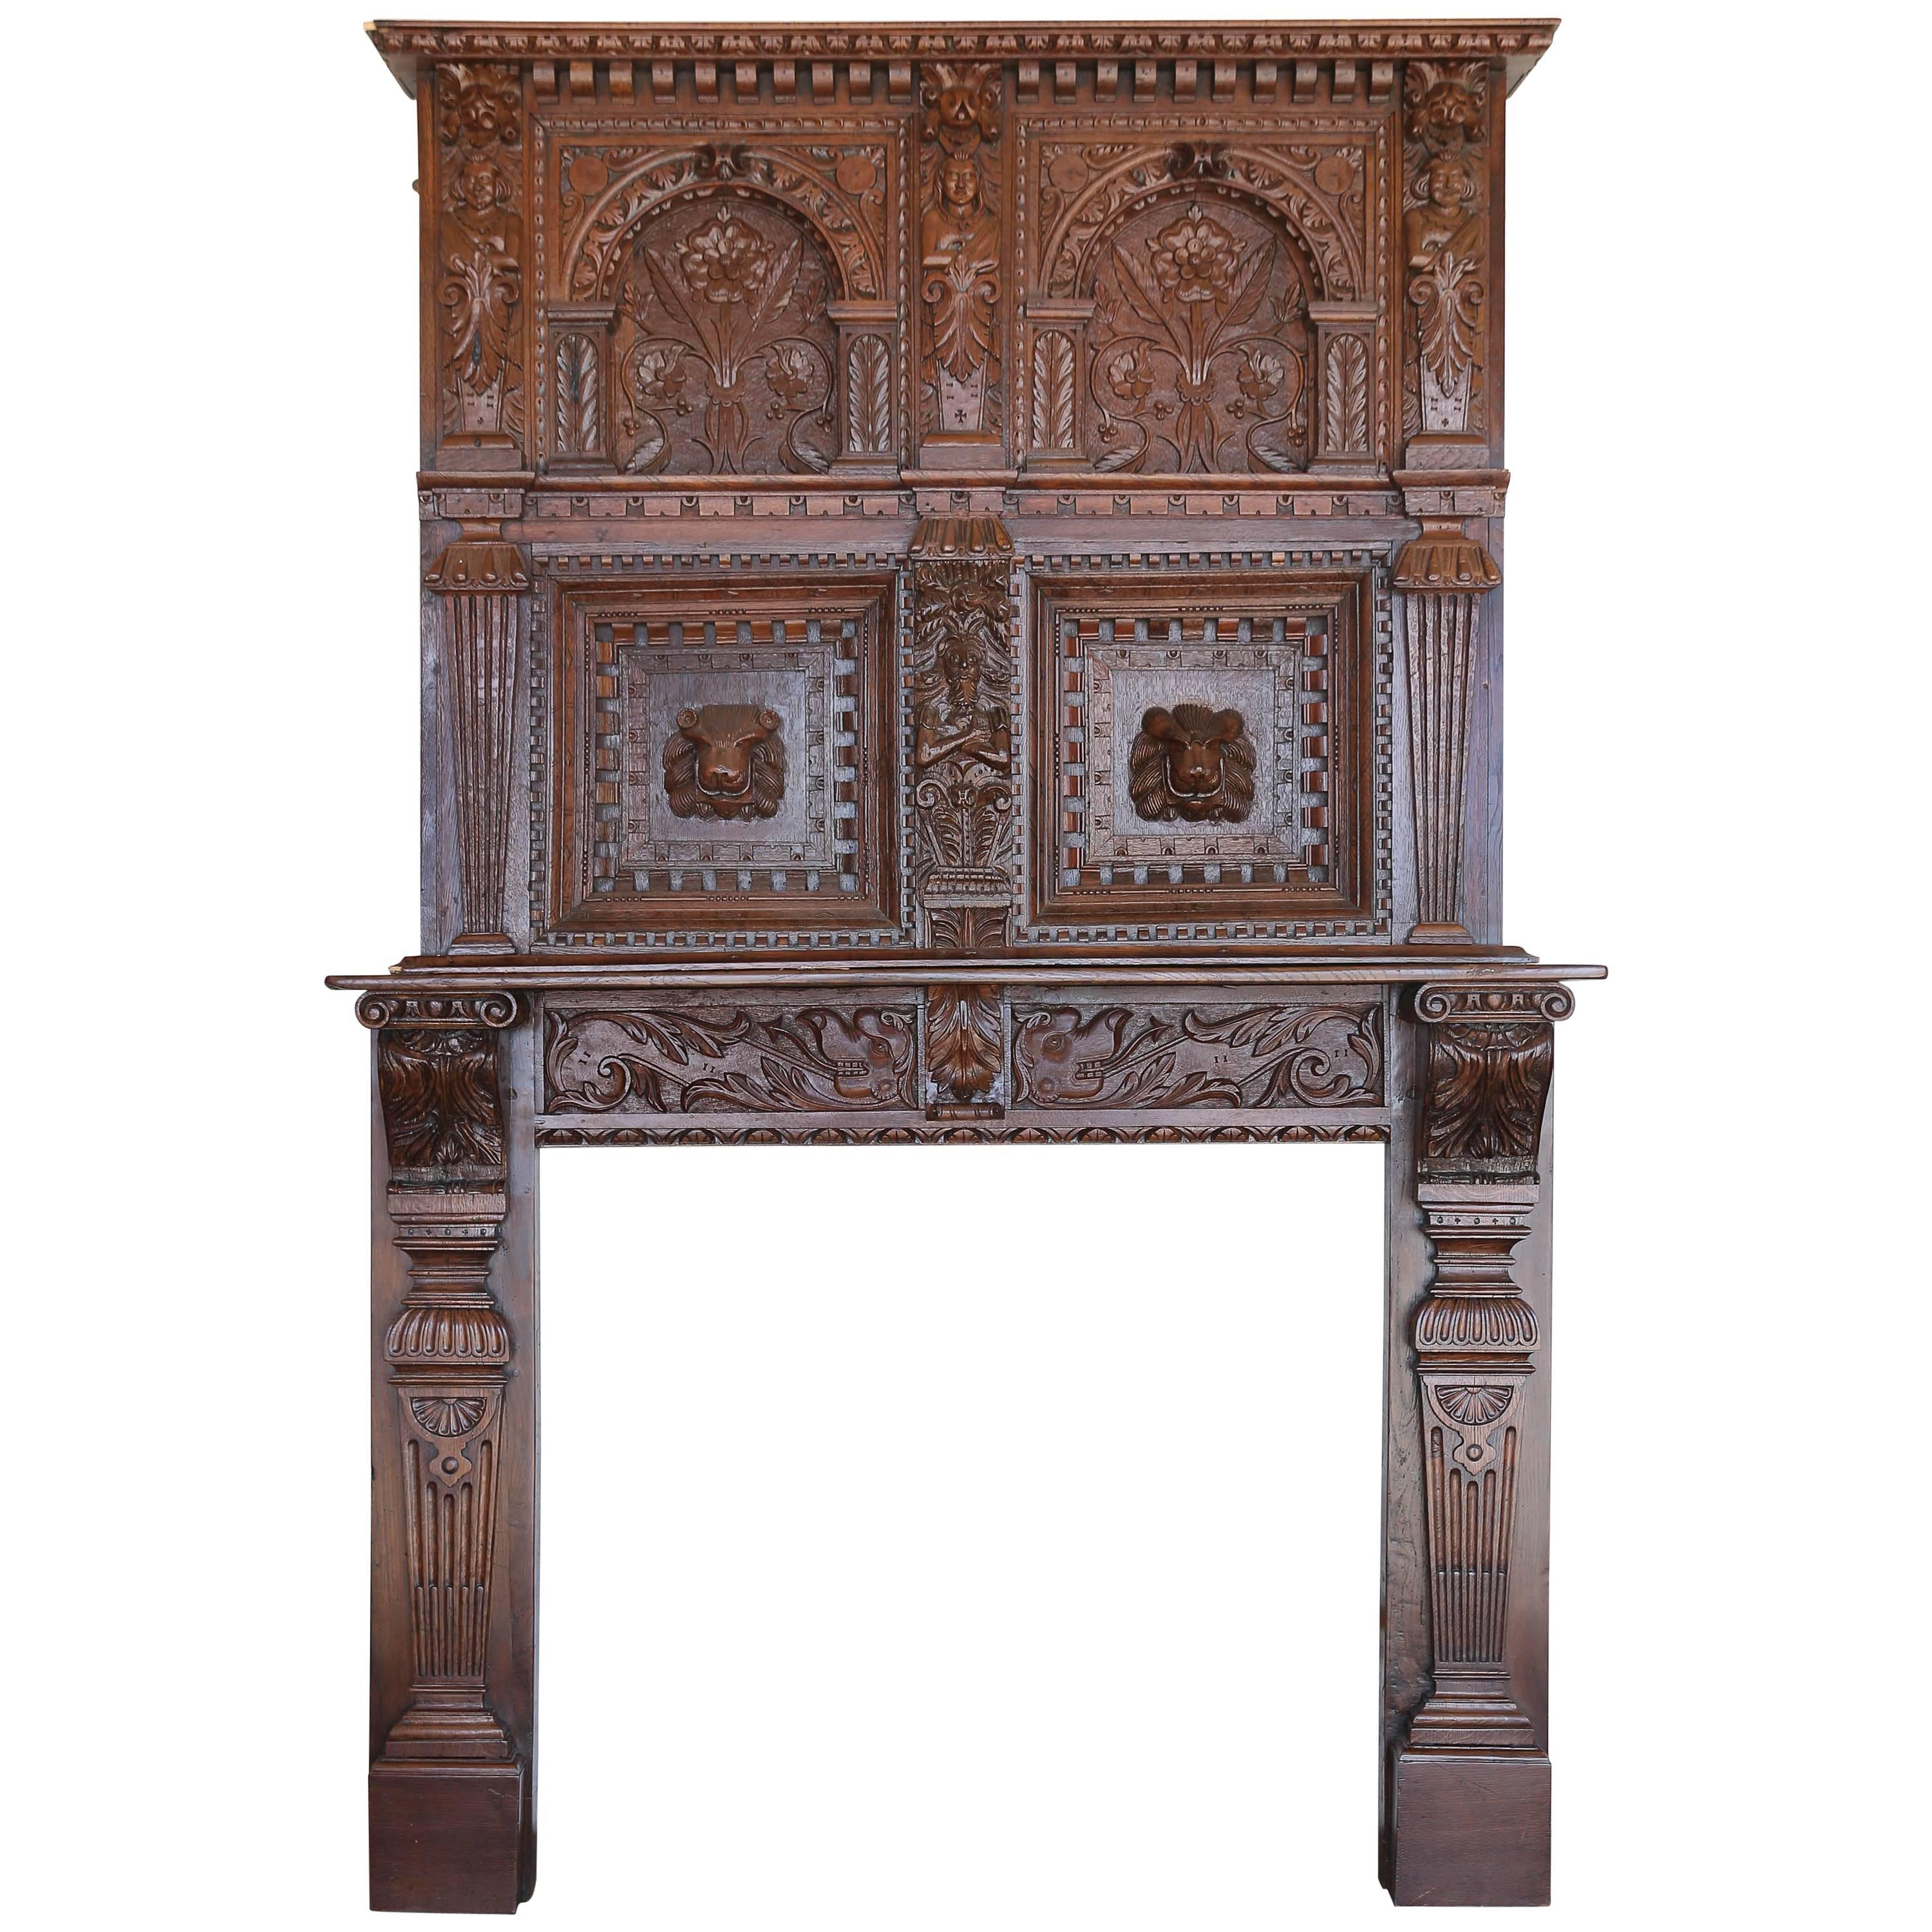 17th Century Baroque Carved Fireplace Surround and Over-Mantel For Sale